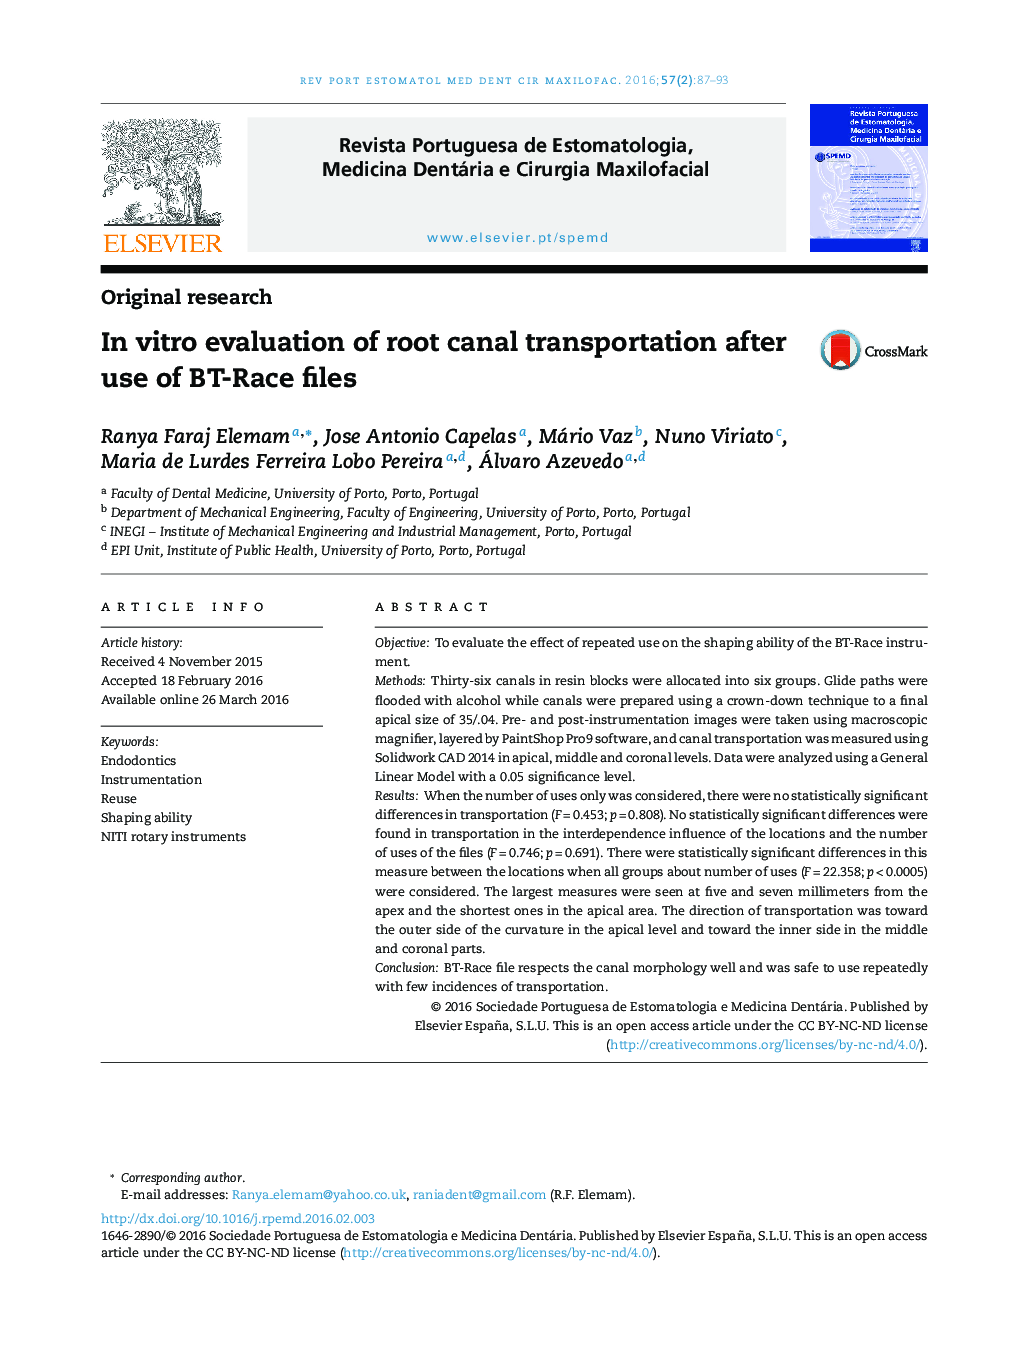 In vitro evaluation of root canal transportation after use of BT-Race files